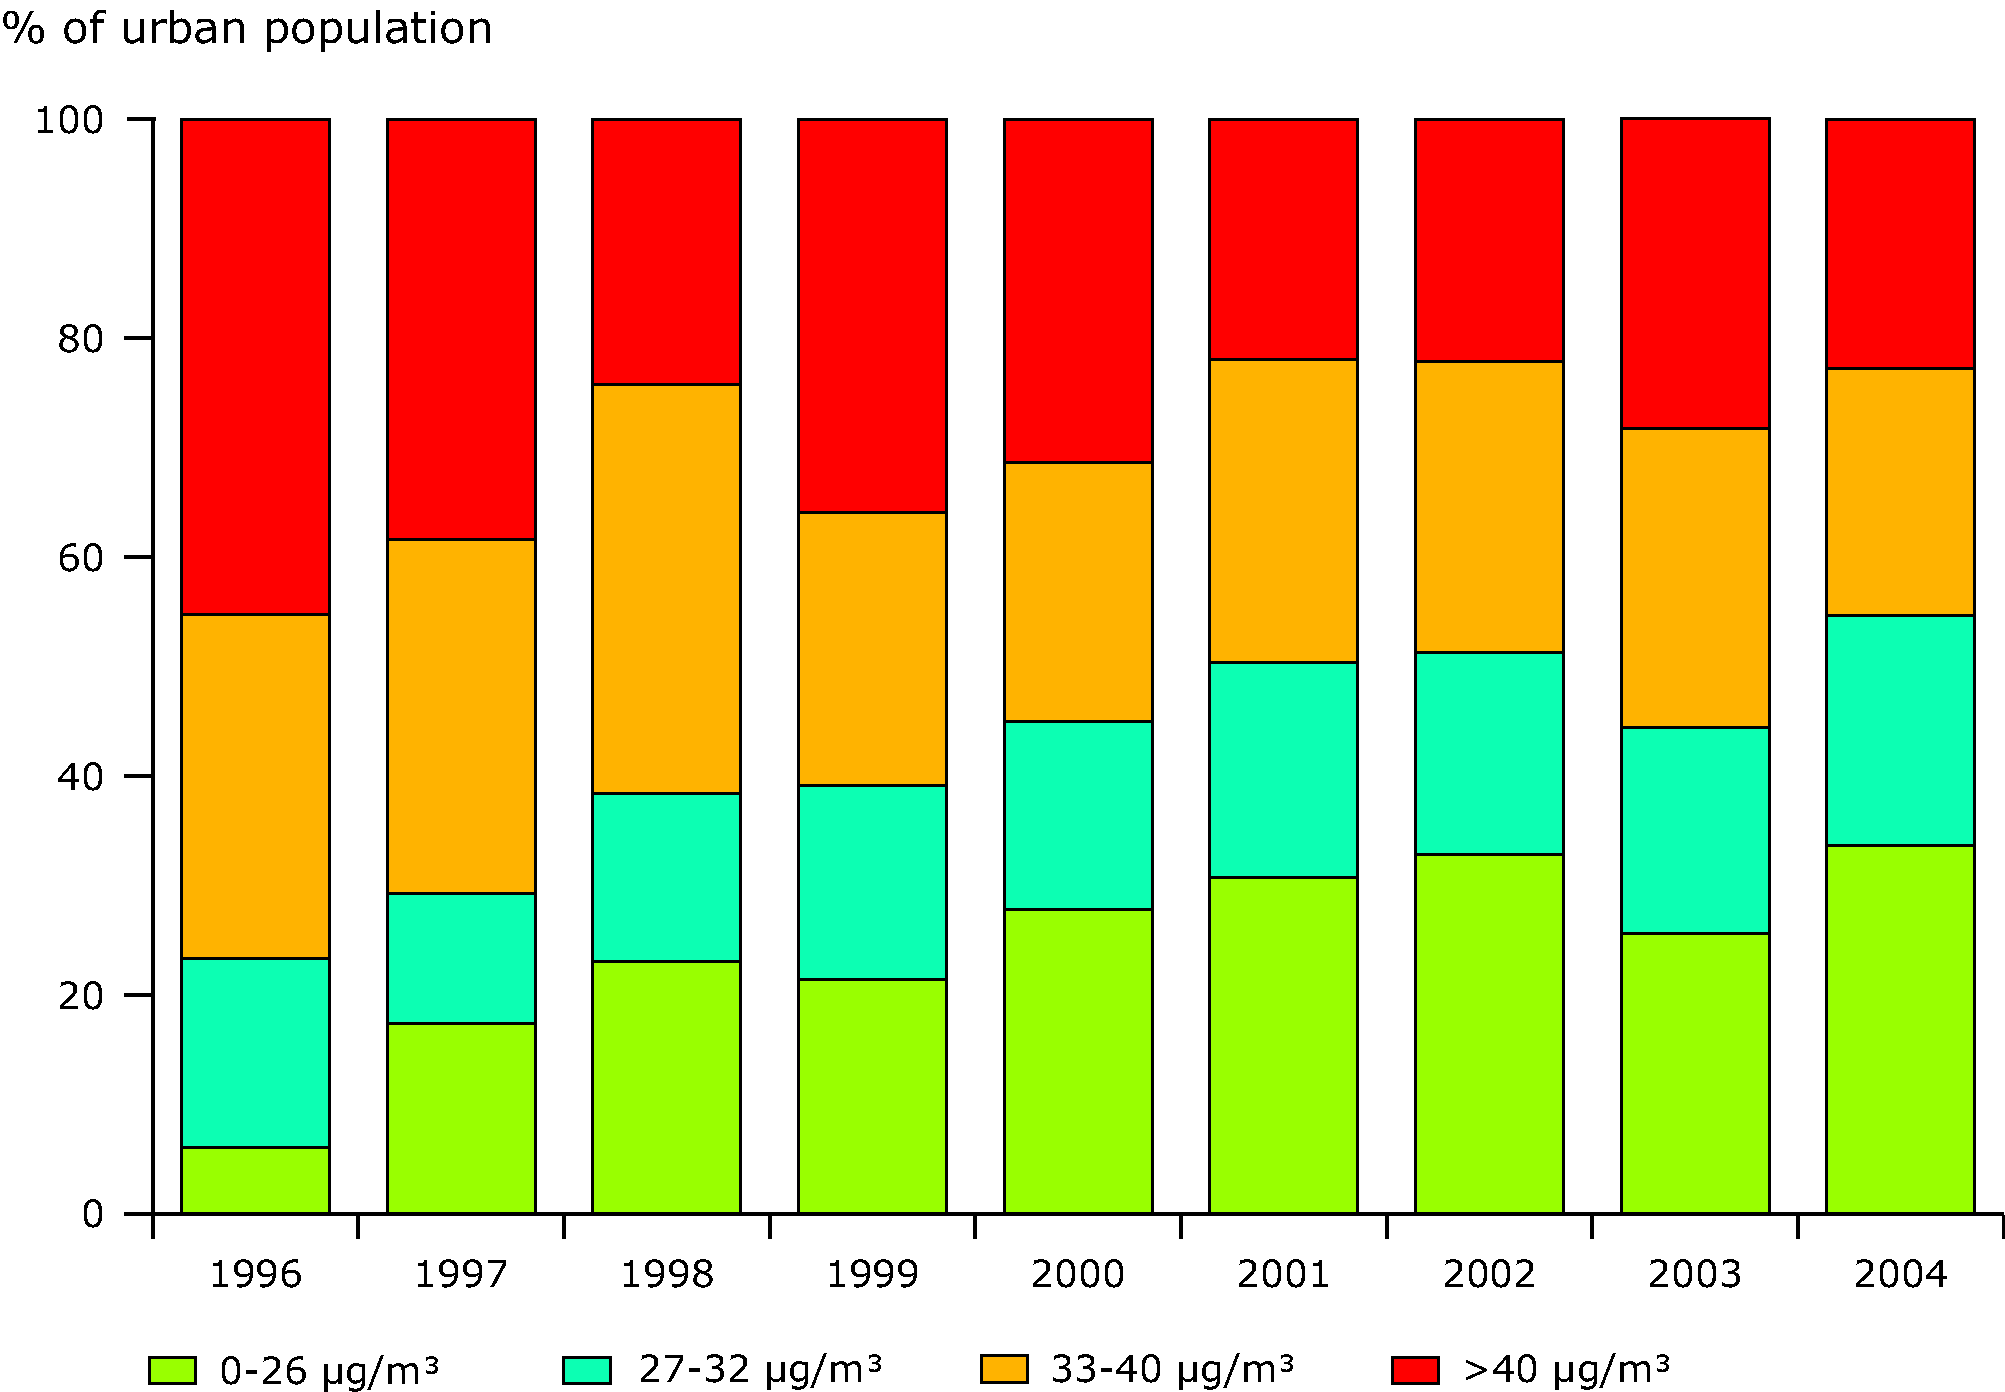 Percentage of population exposed to NO2 annual concentrations in urban areas, EEA member countries, 1996-2005